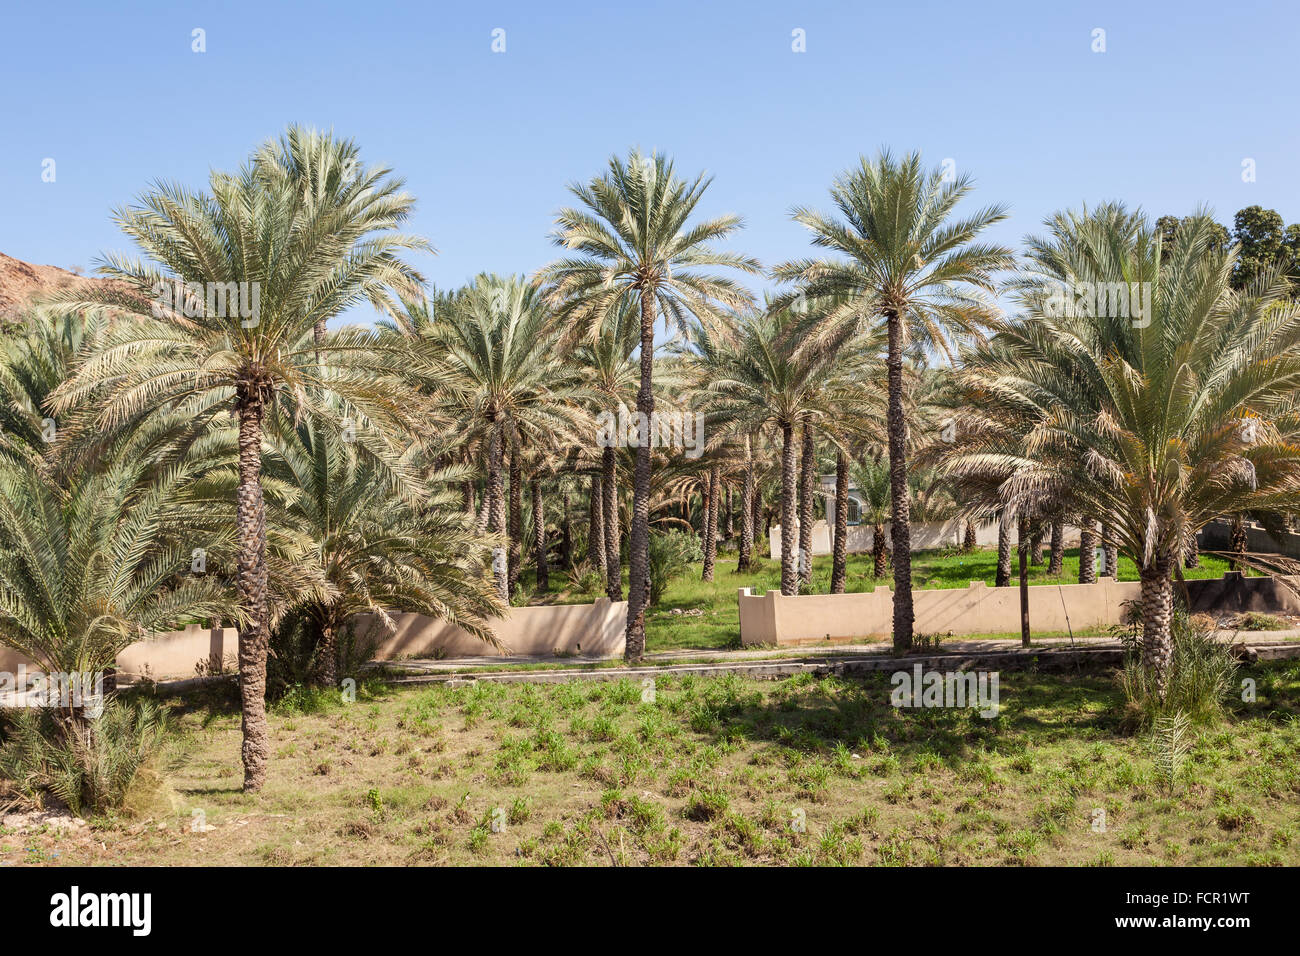 Date palm trees in an oasis near Nizwa. Sultanate of Oman, Middle East Stock Photo